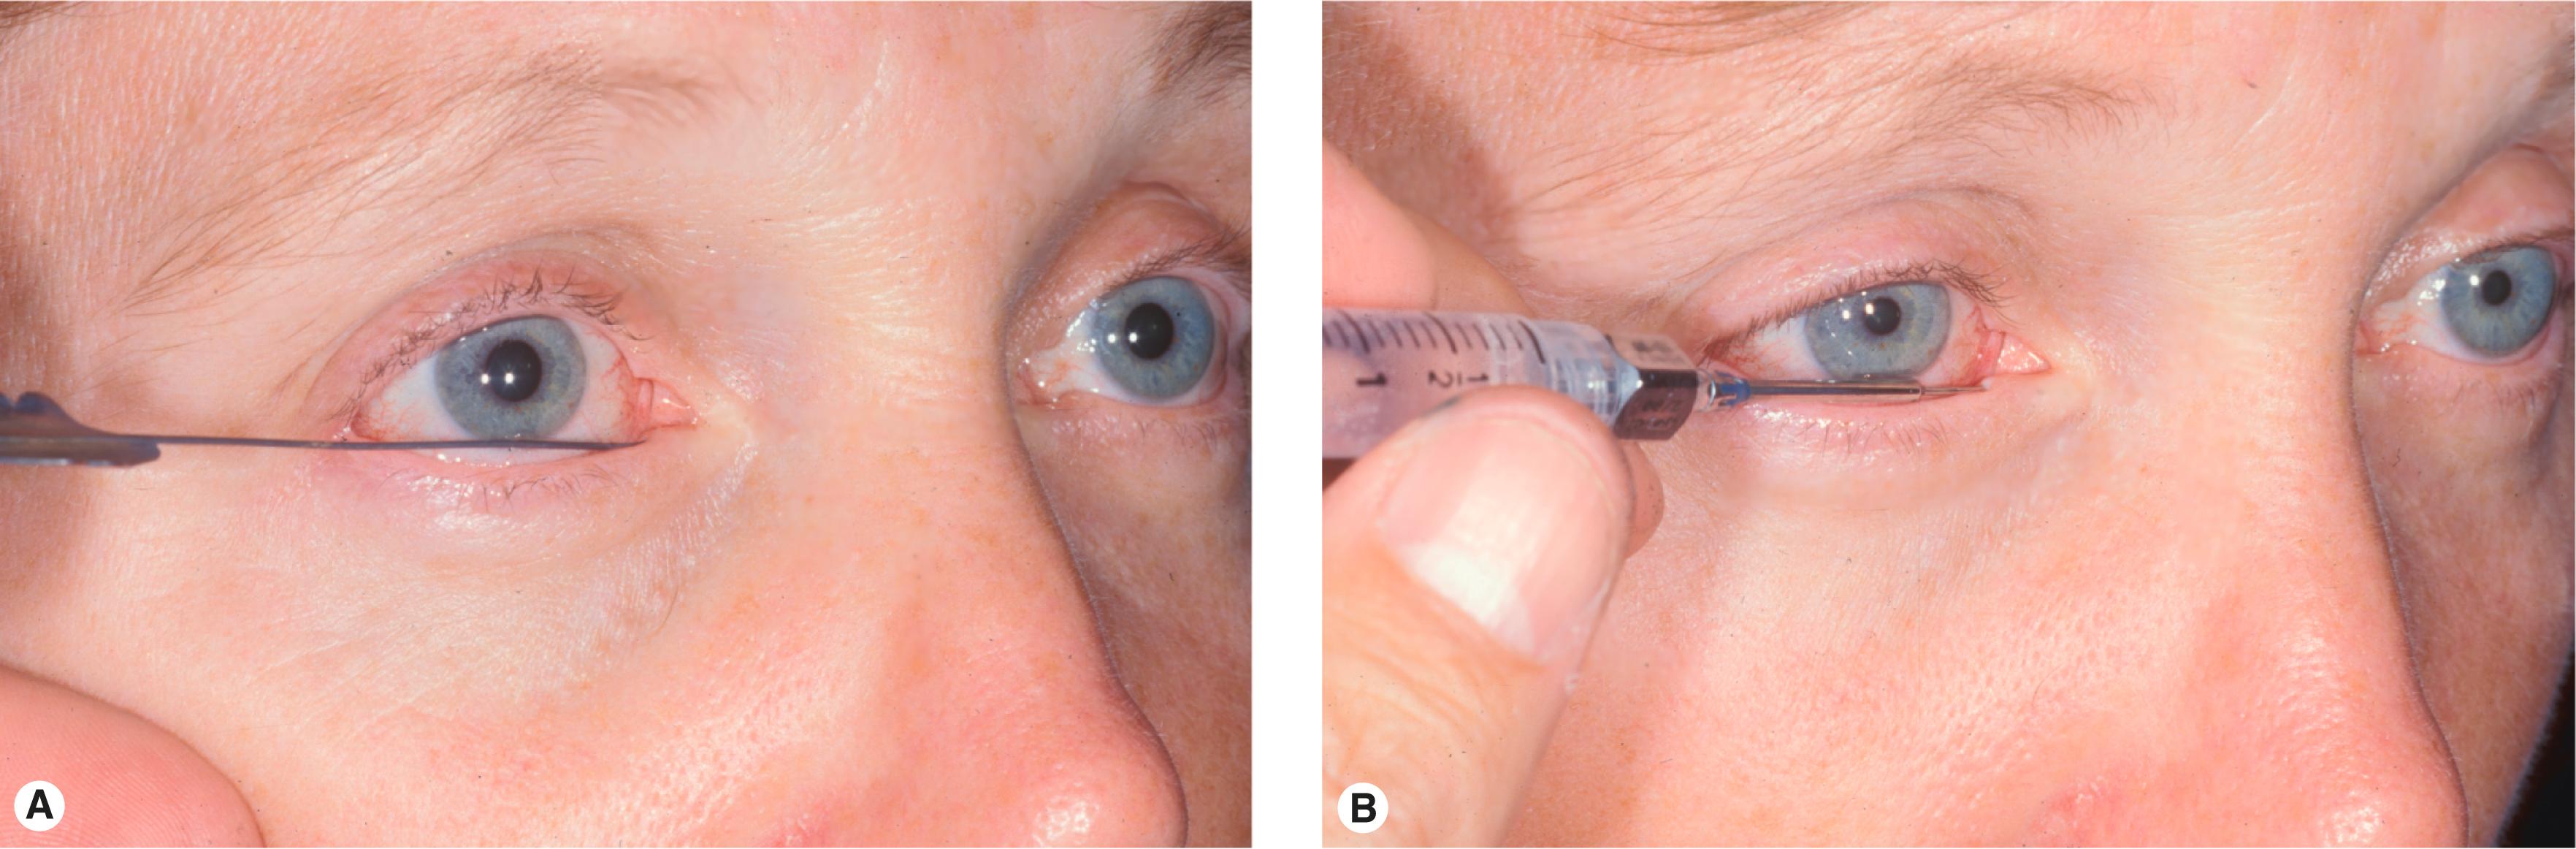 Figure 10.10, Lacrimal examination. ( A ) Canalicular palpation using a no. 0 or 00 Bowman probe (Storz E4200–E4205 for a complete set) to test patency of the canaliculus. ( B ) Lacrimal irrigation using a lacrimal cannula (Storz E4406 or E4404) to test patency of the NLD. No reflux through the opposite canaliculus should be present.